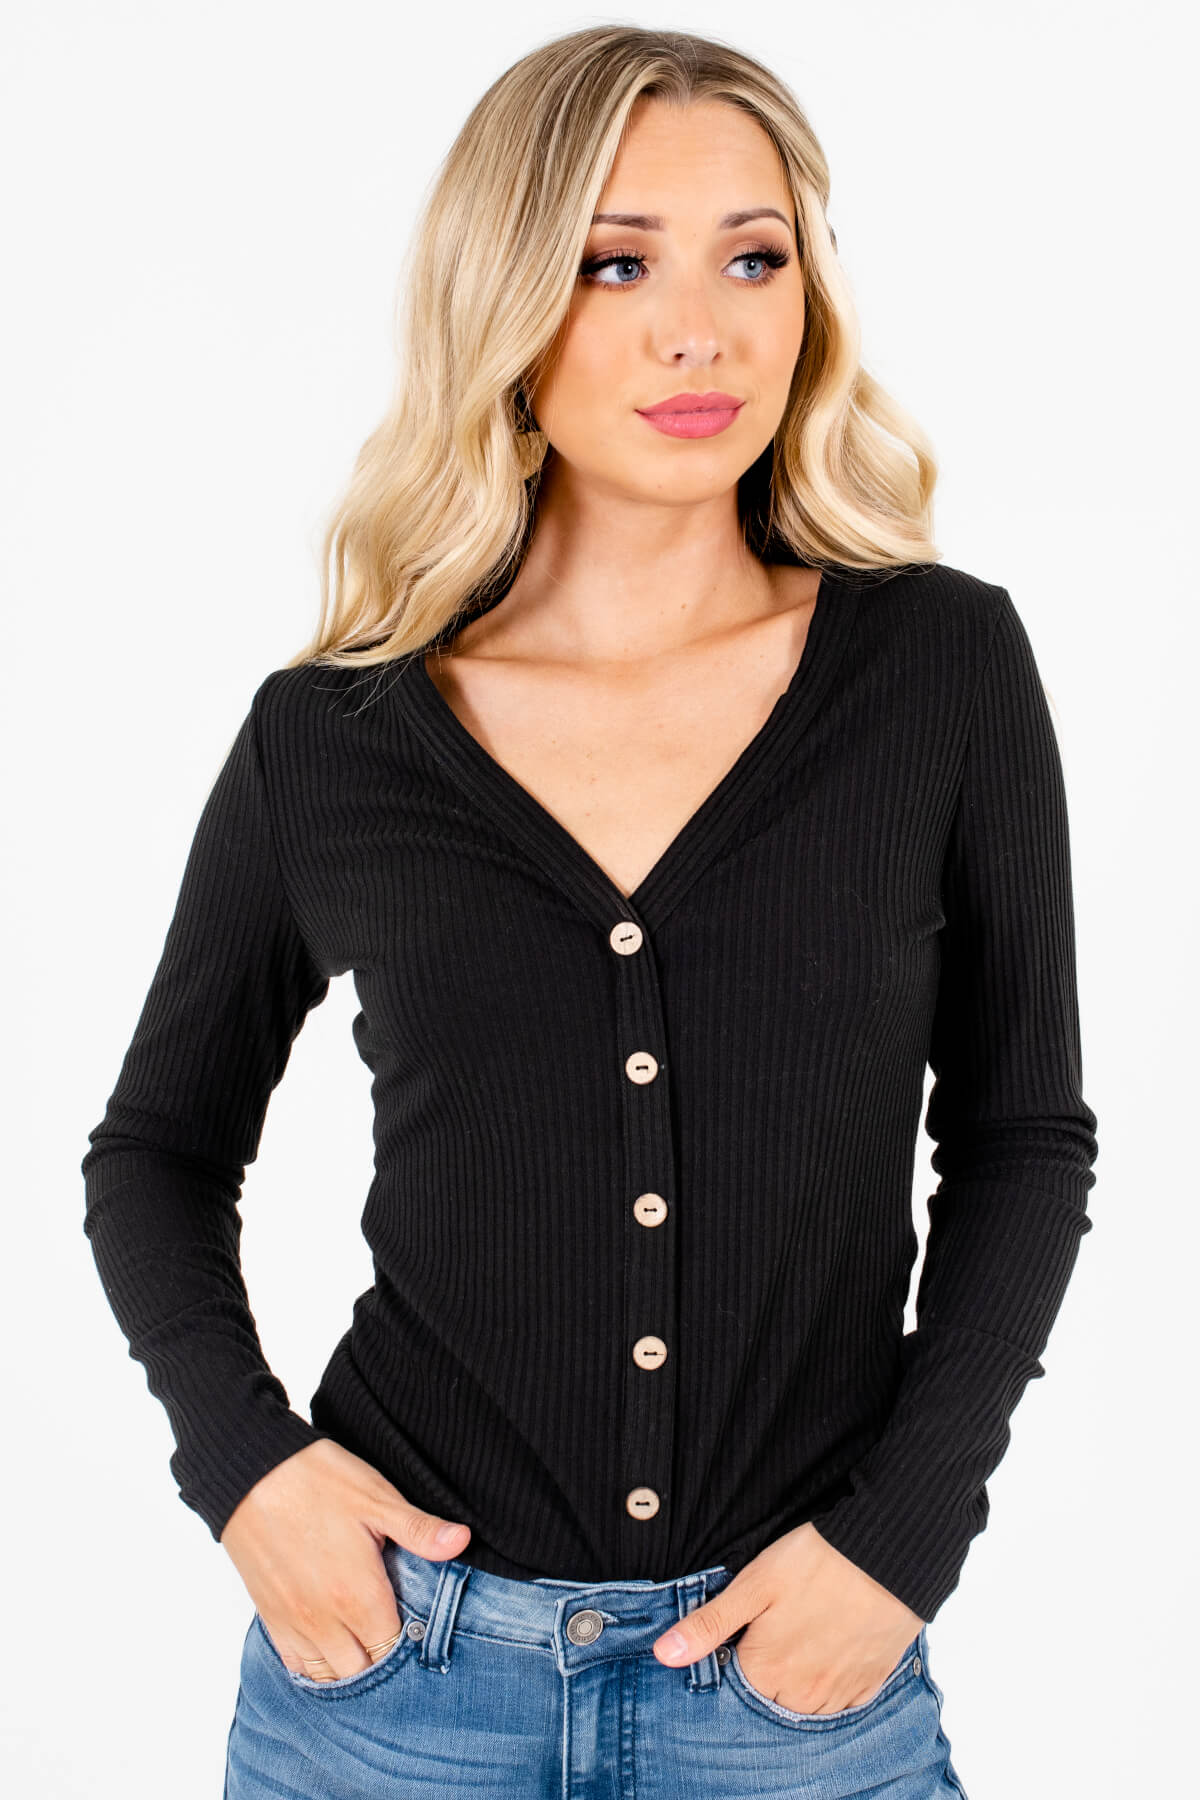 Black Ribbed Material Boutique Long Sleeve Tops for Women